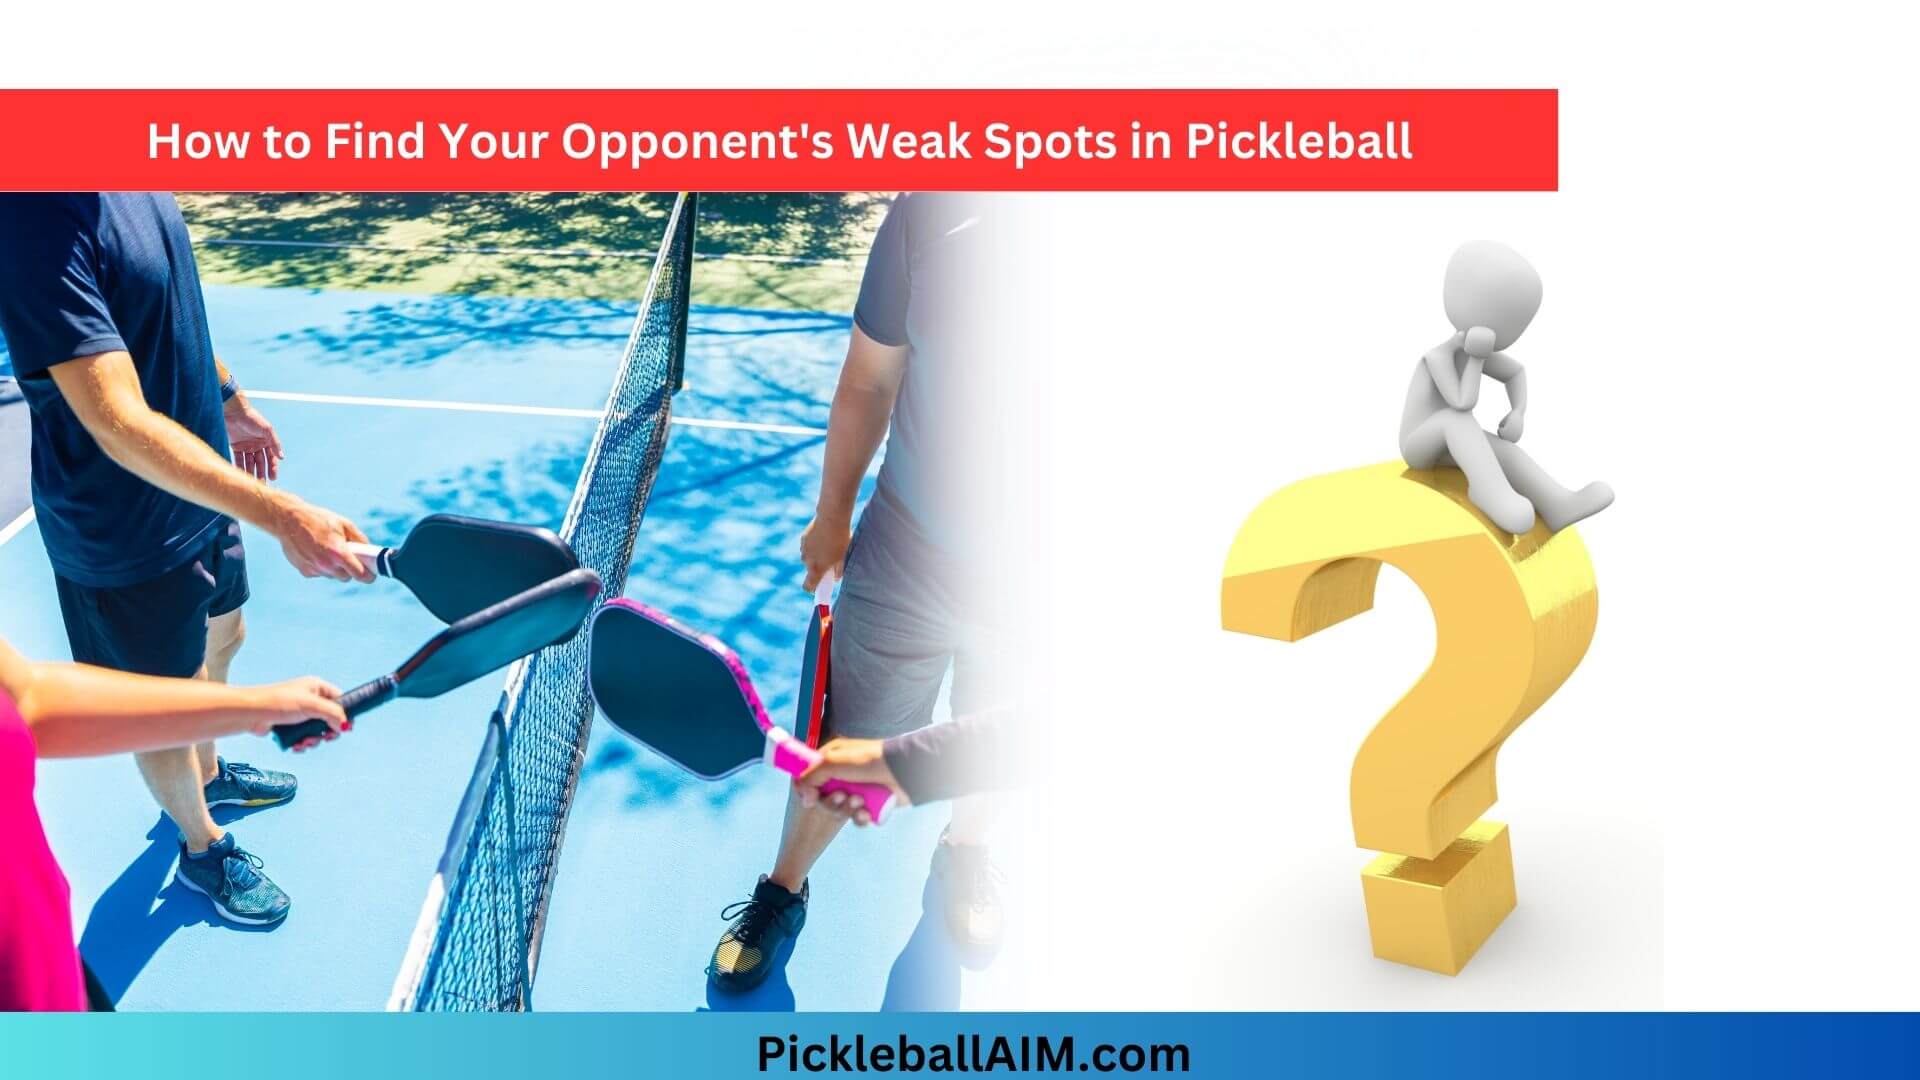 How to Find Your Opponent's Weak Spots in Pickleball